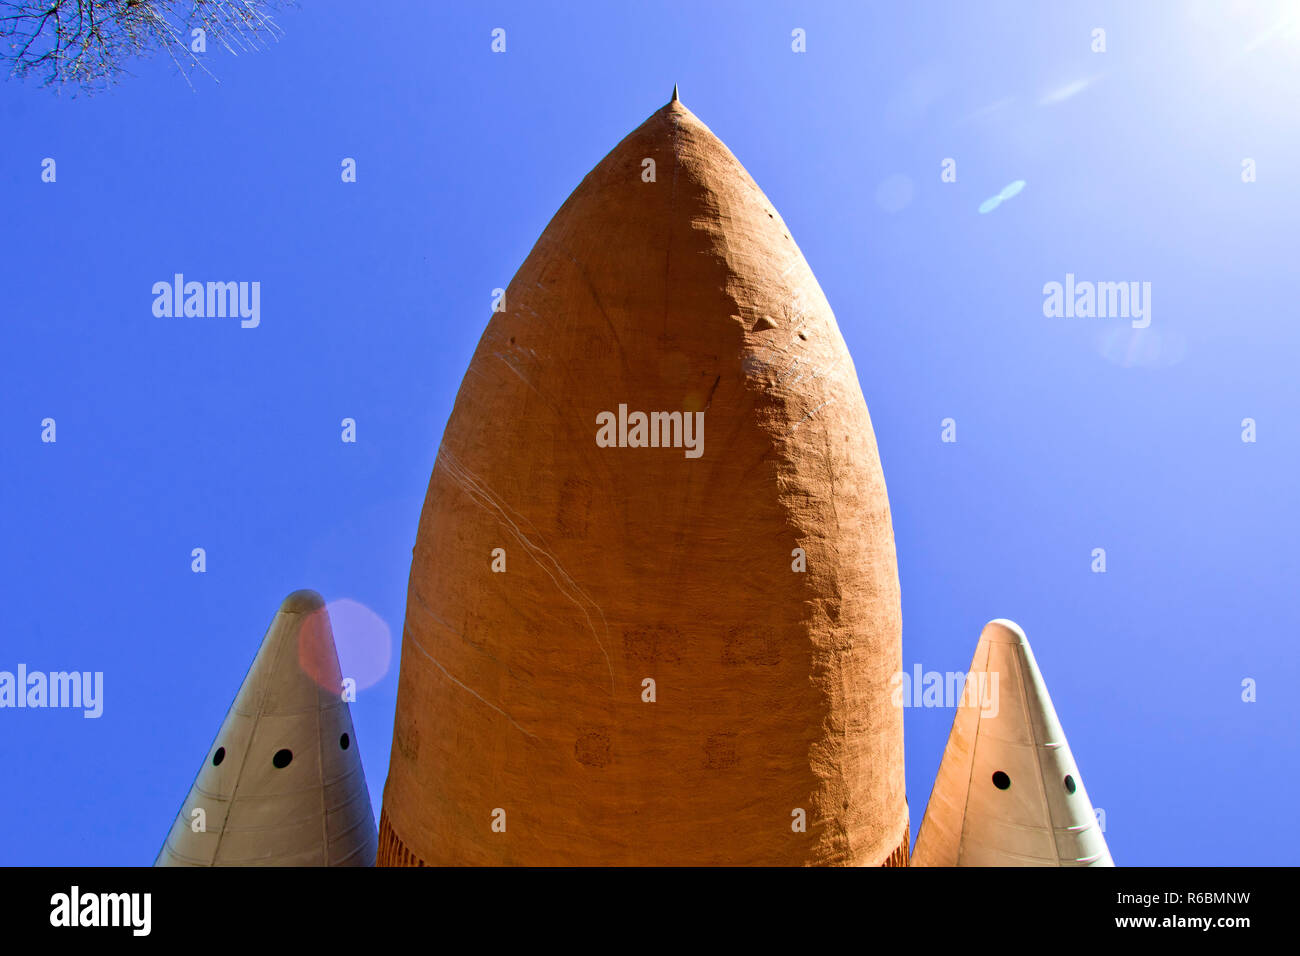 Main Propulsion Test Article External Tank (MPTA-ET) and the nose cones of two Space Shuttle Solid Rocket Boosters (SRBs) in Huntsville, AL, USA Stock Photo